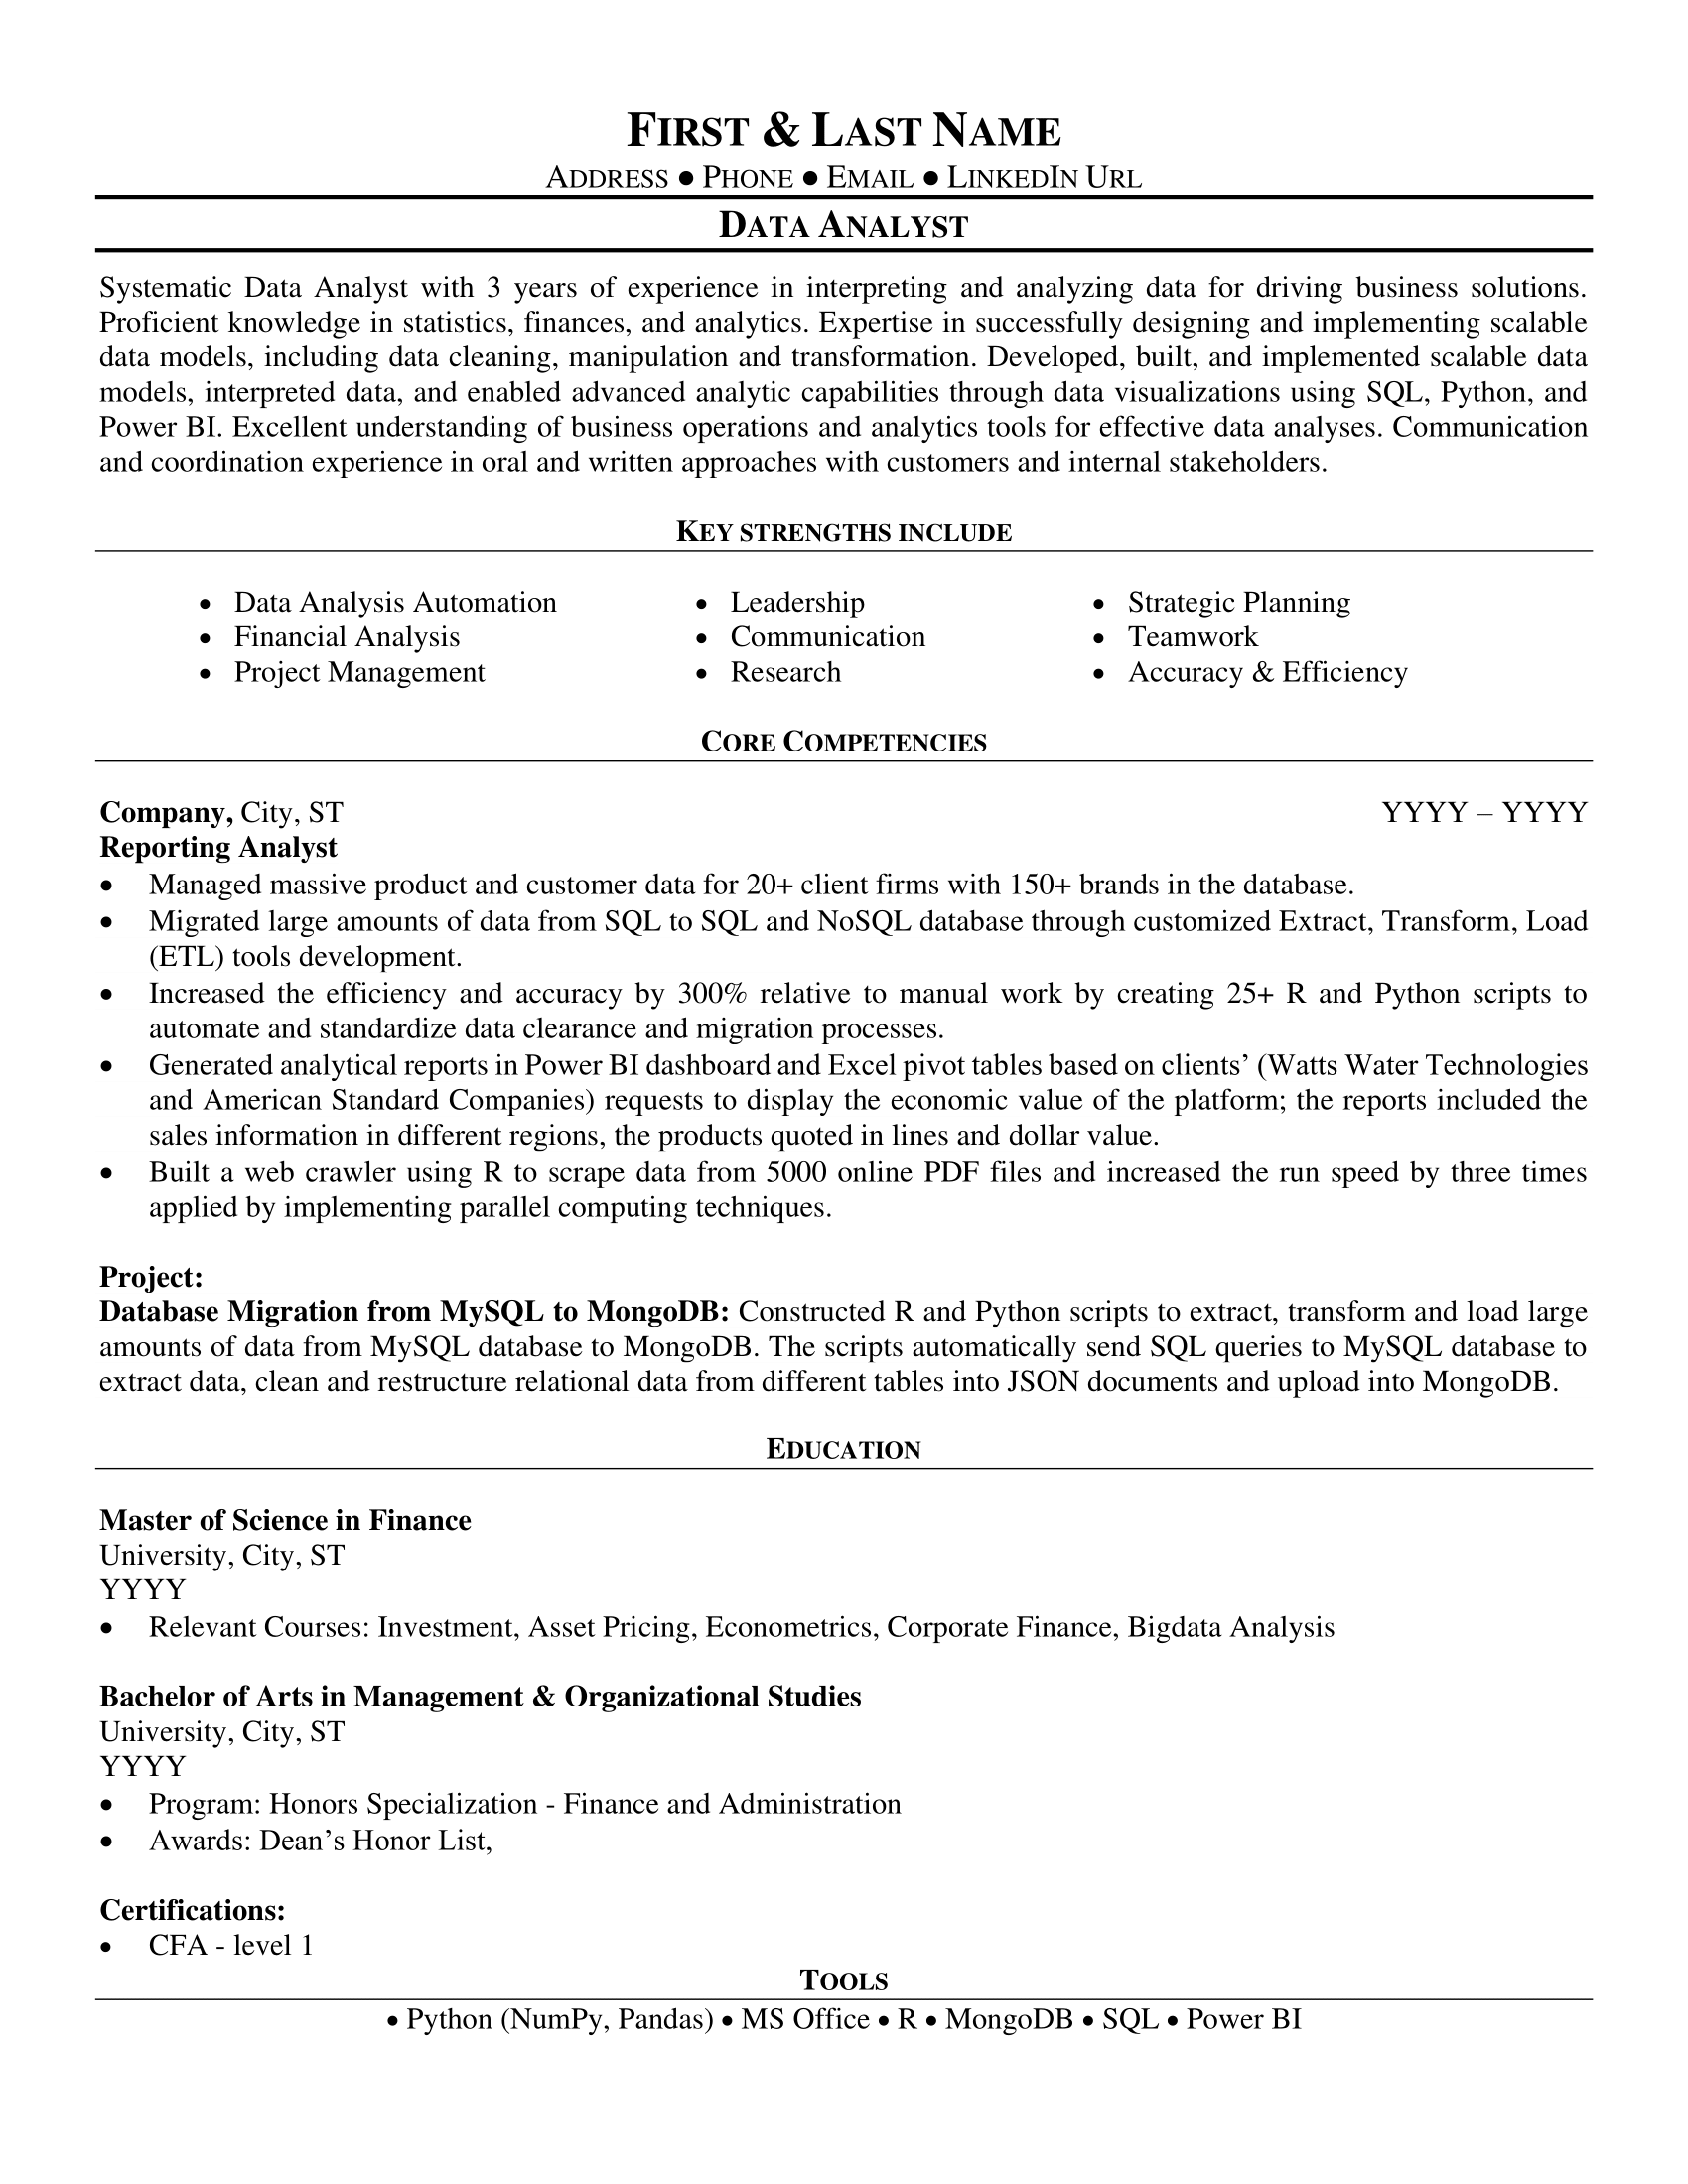 sample resume for experienced data analyst